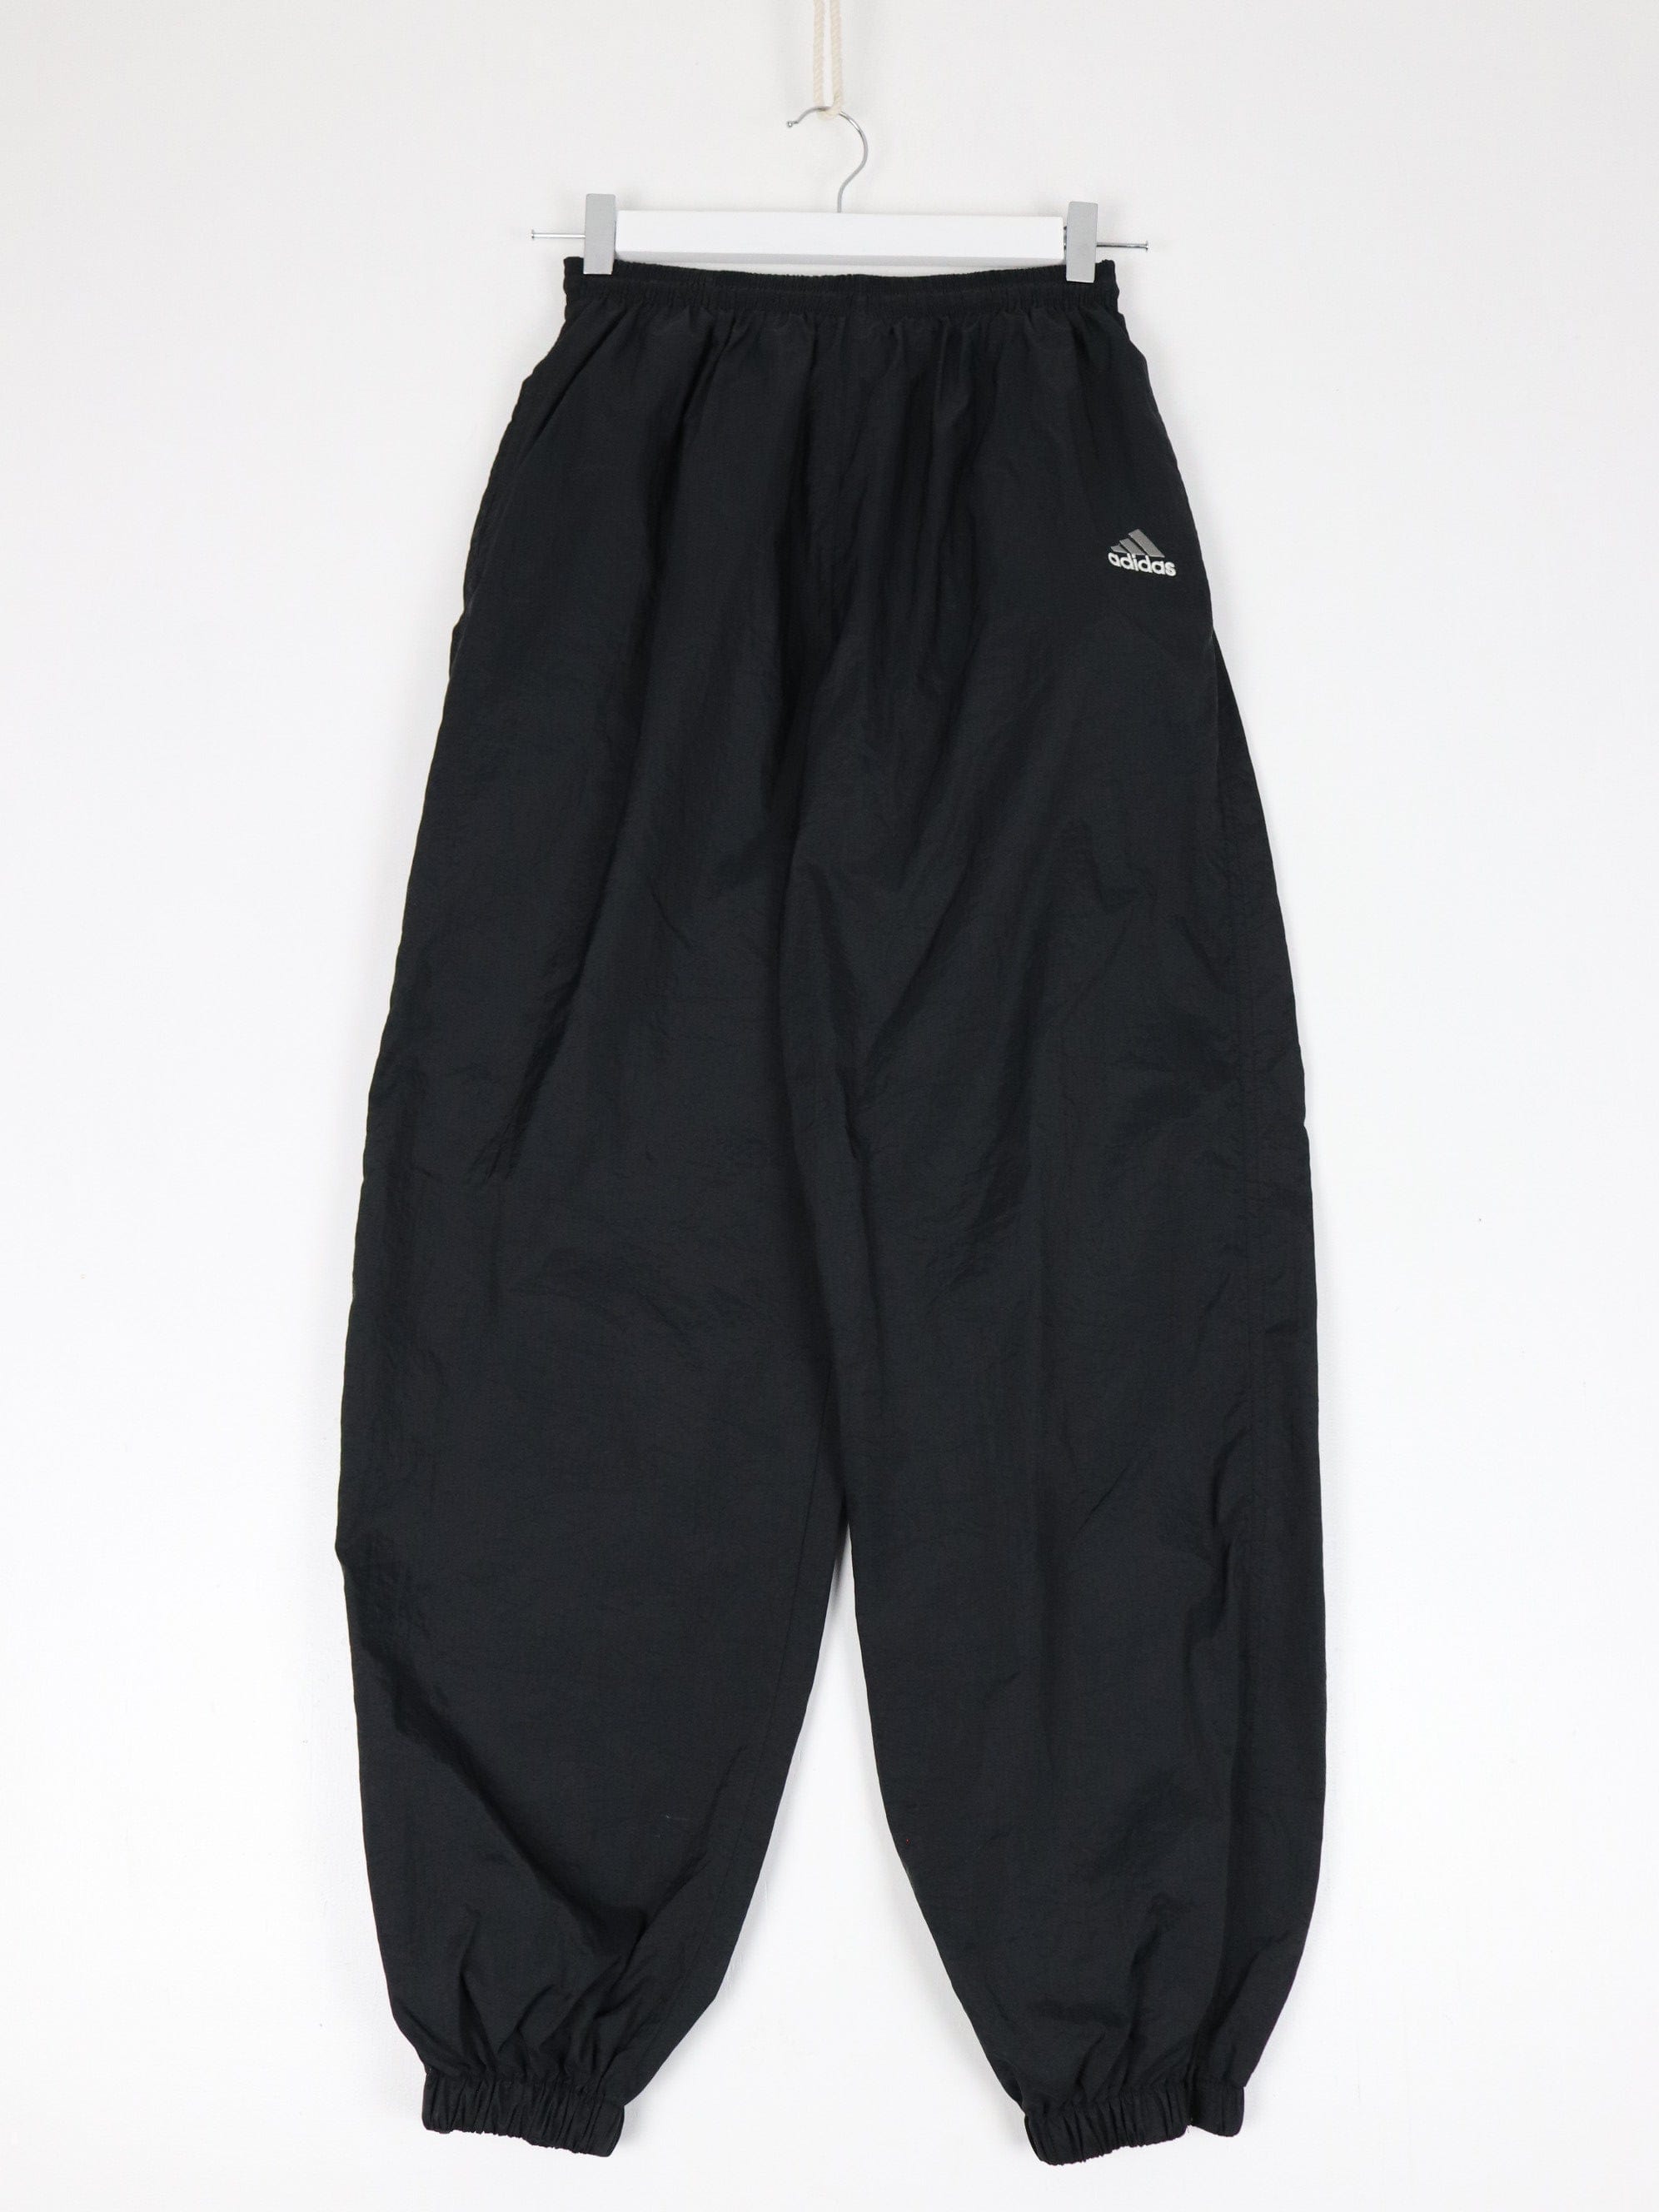 Vintage Adidas Pants Youth XL Black Cuffed Track Athletic 90s